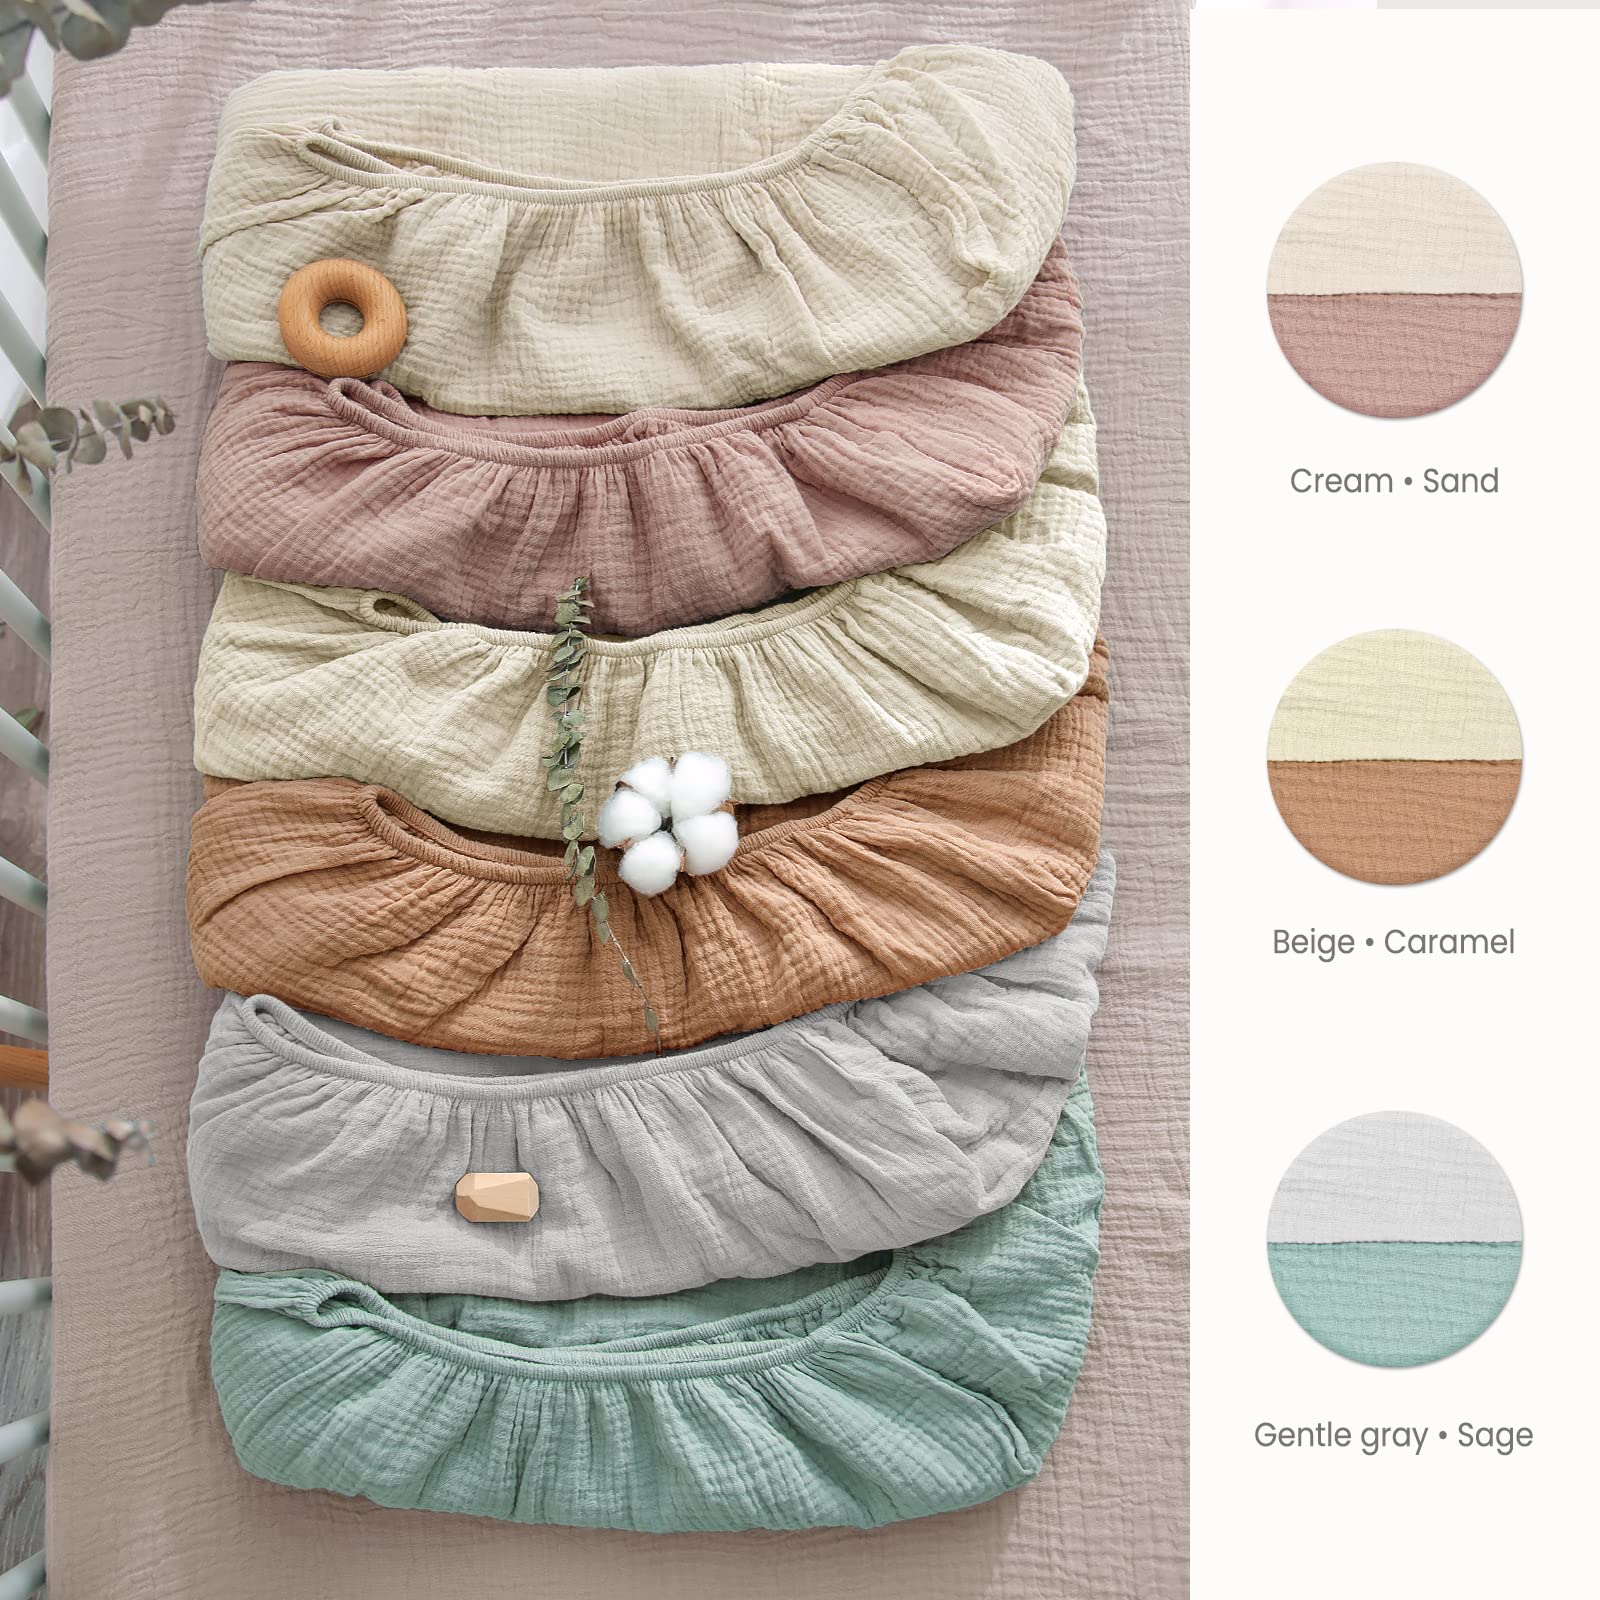 Muslin Crib Sheets & Quilted Changing Pad Covers